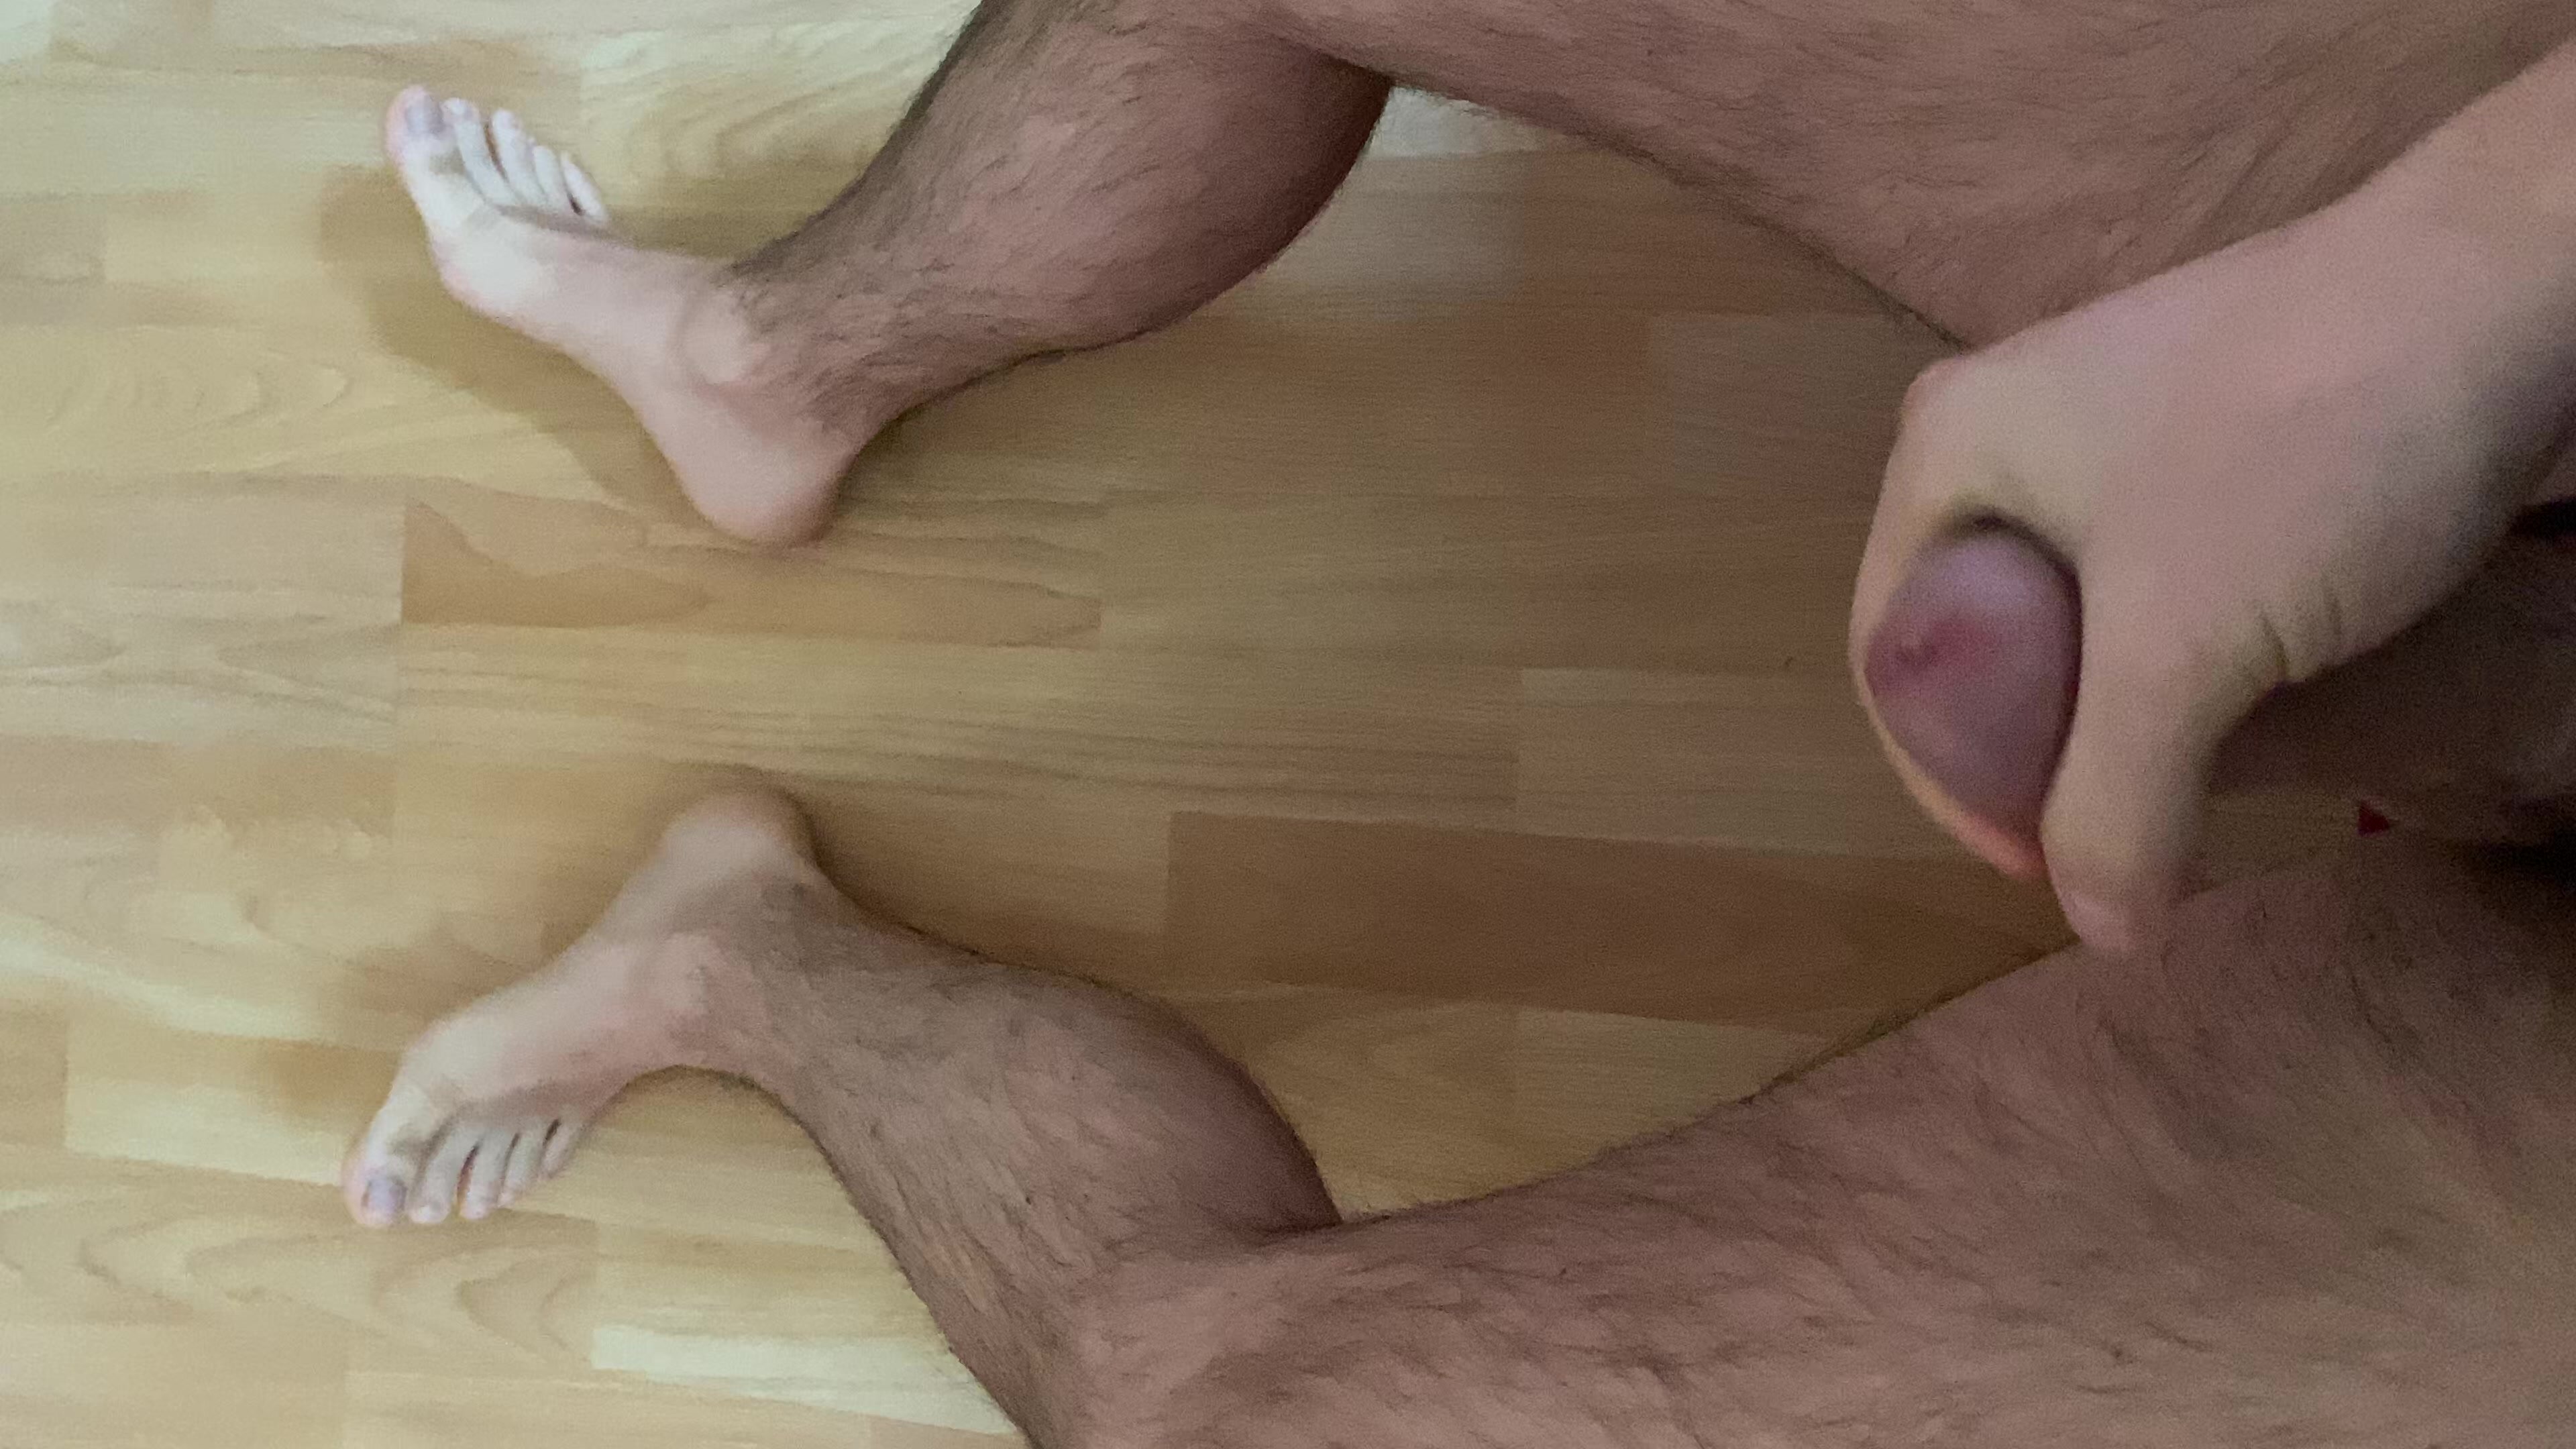 Large Cum with feet on display